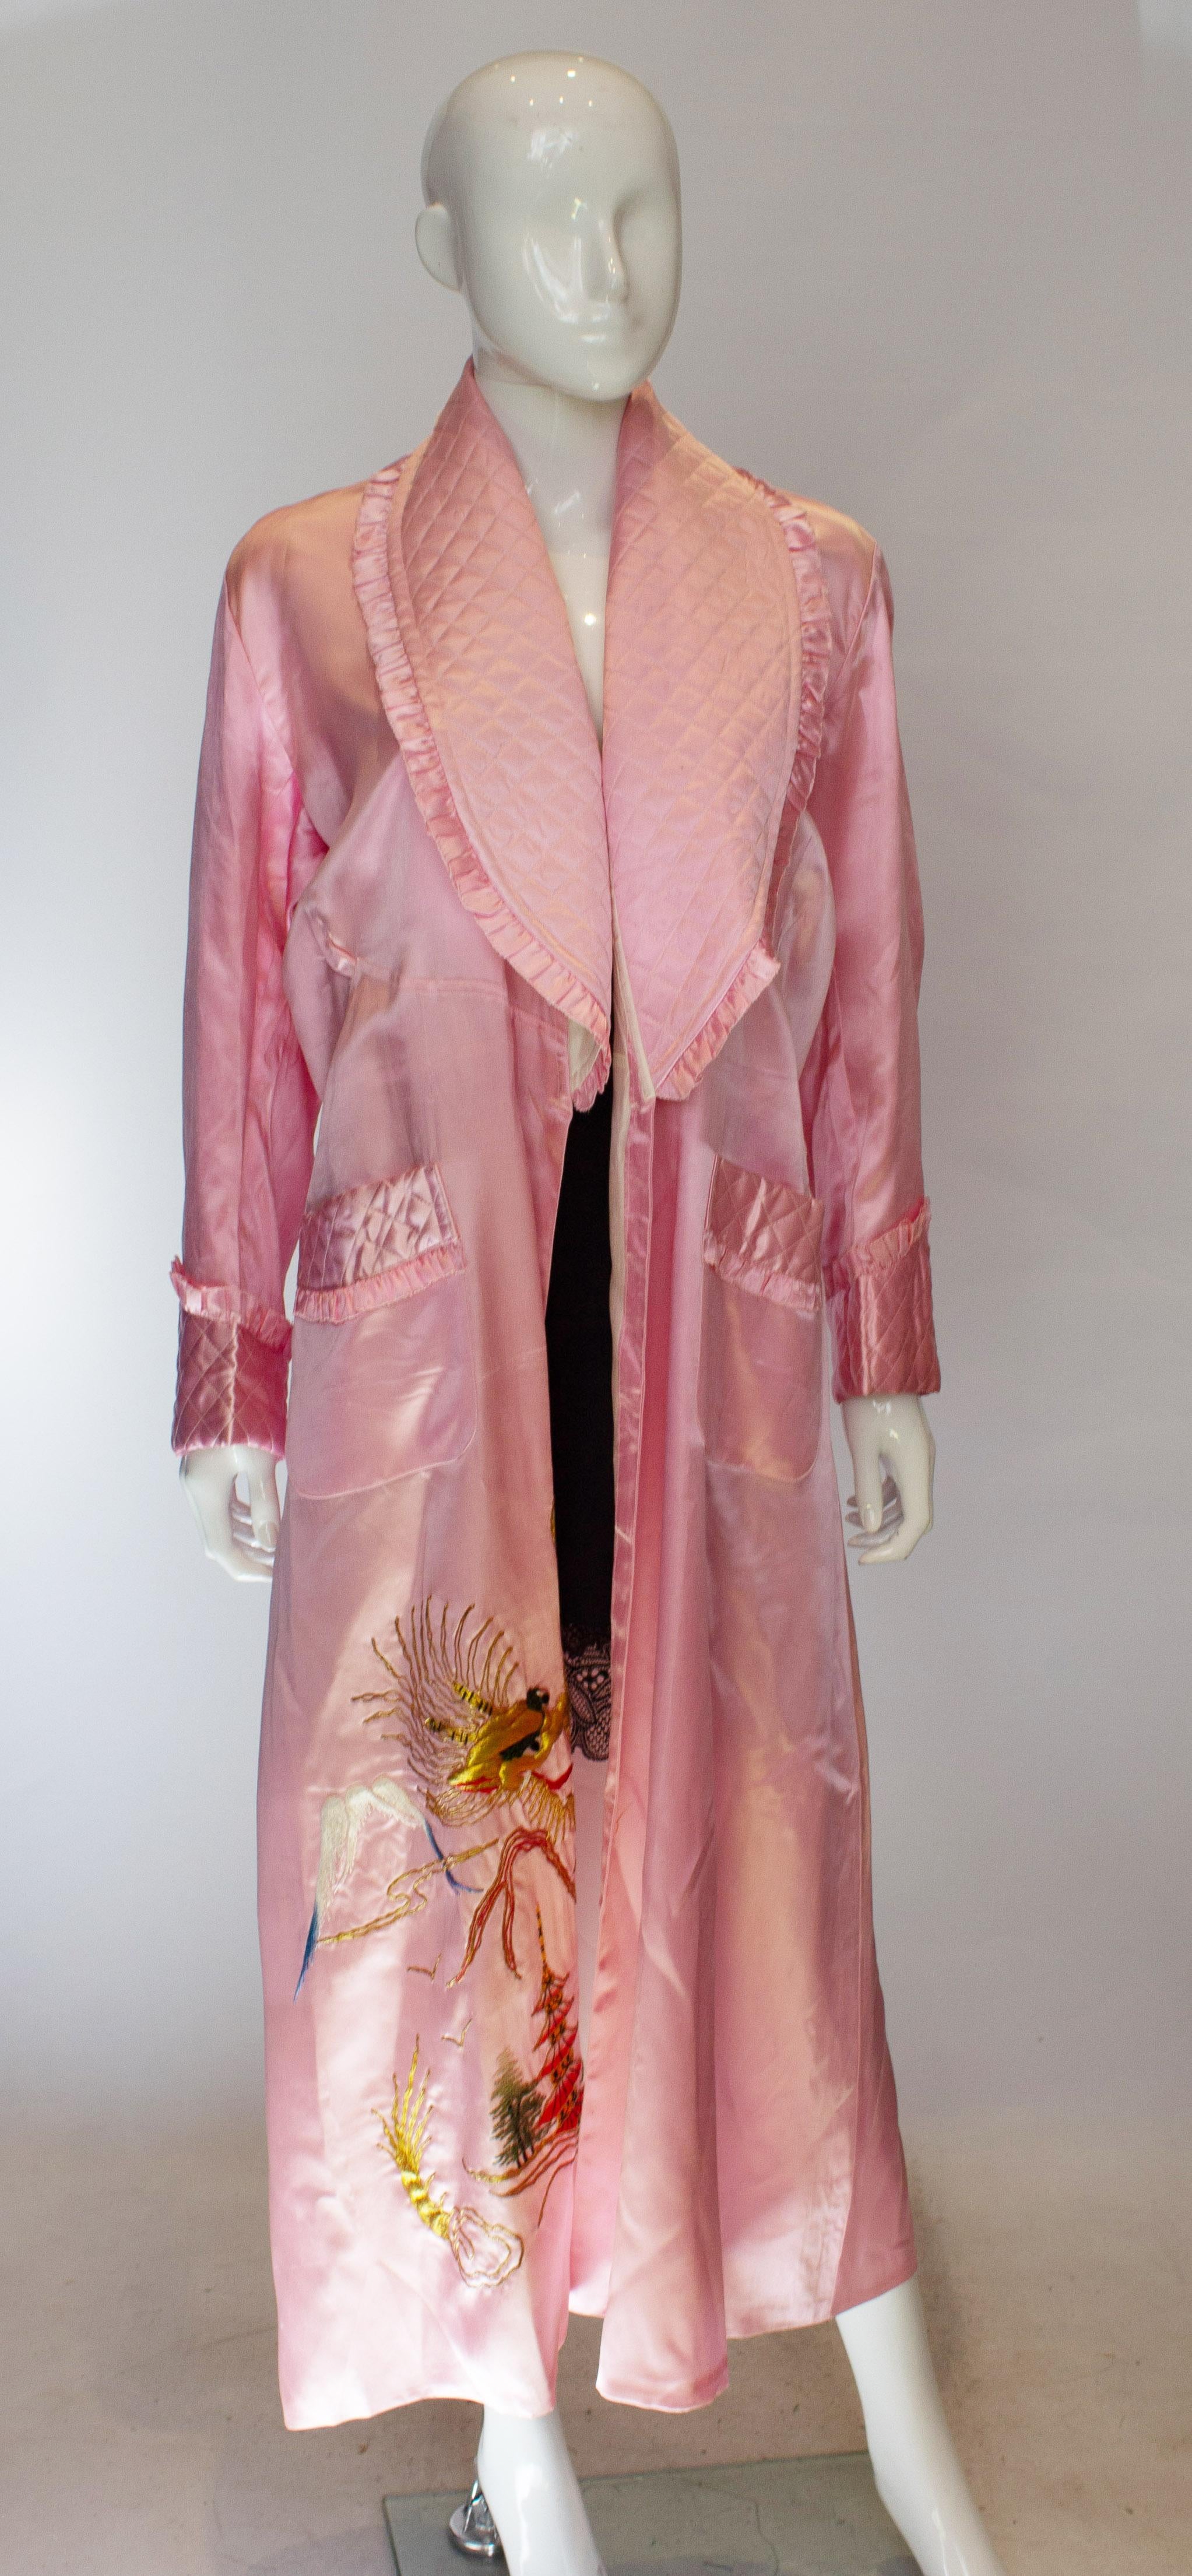 A pretty pink vintage robe with a quilted frilled shawl collar and two quilted pockets. The robe is lined and has embroidery detail.Measurements bust up to 41'',length 52''